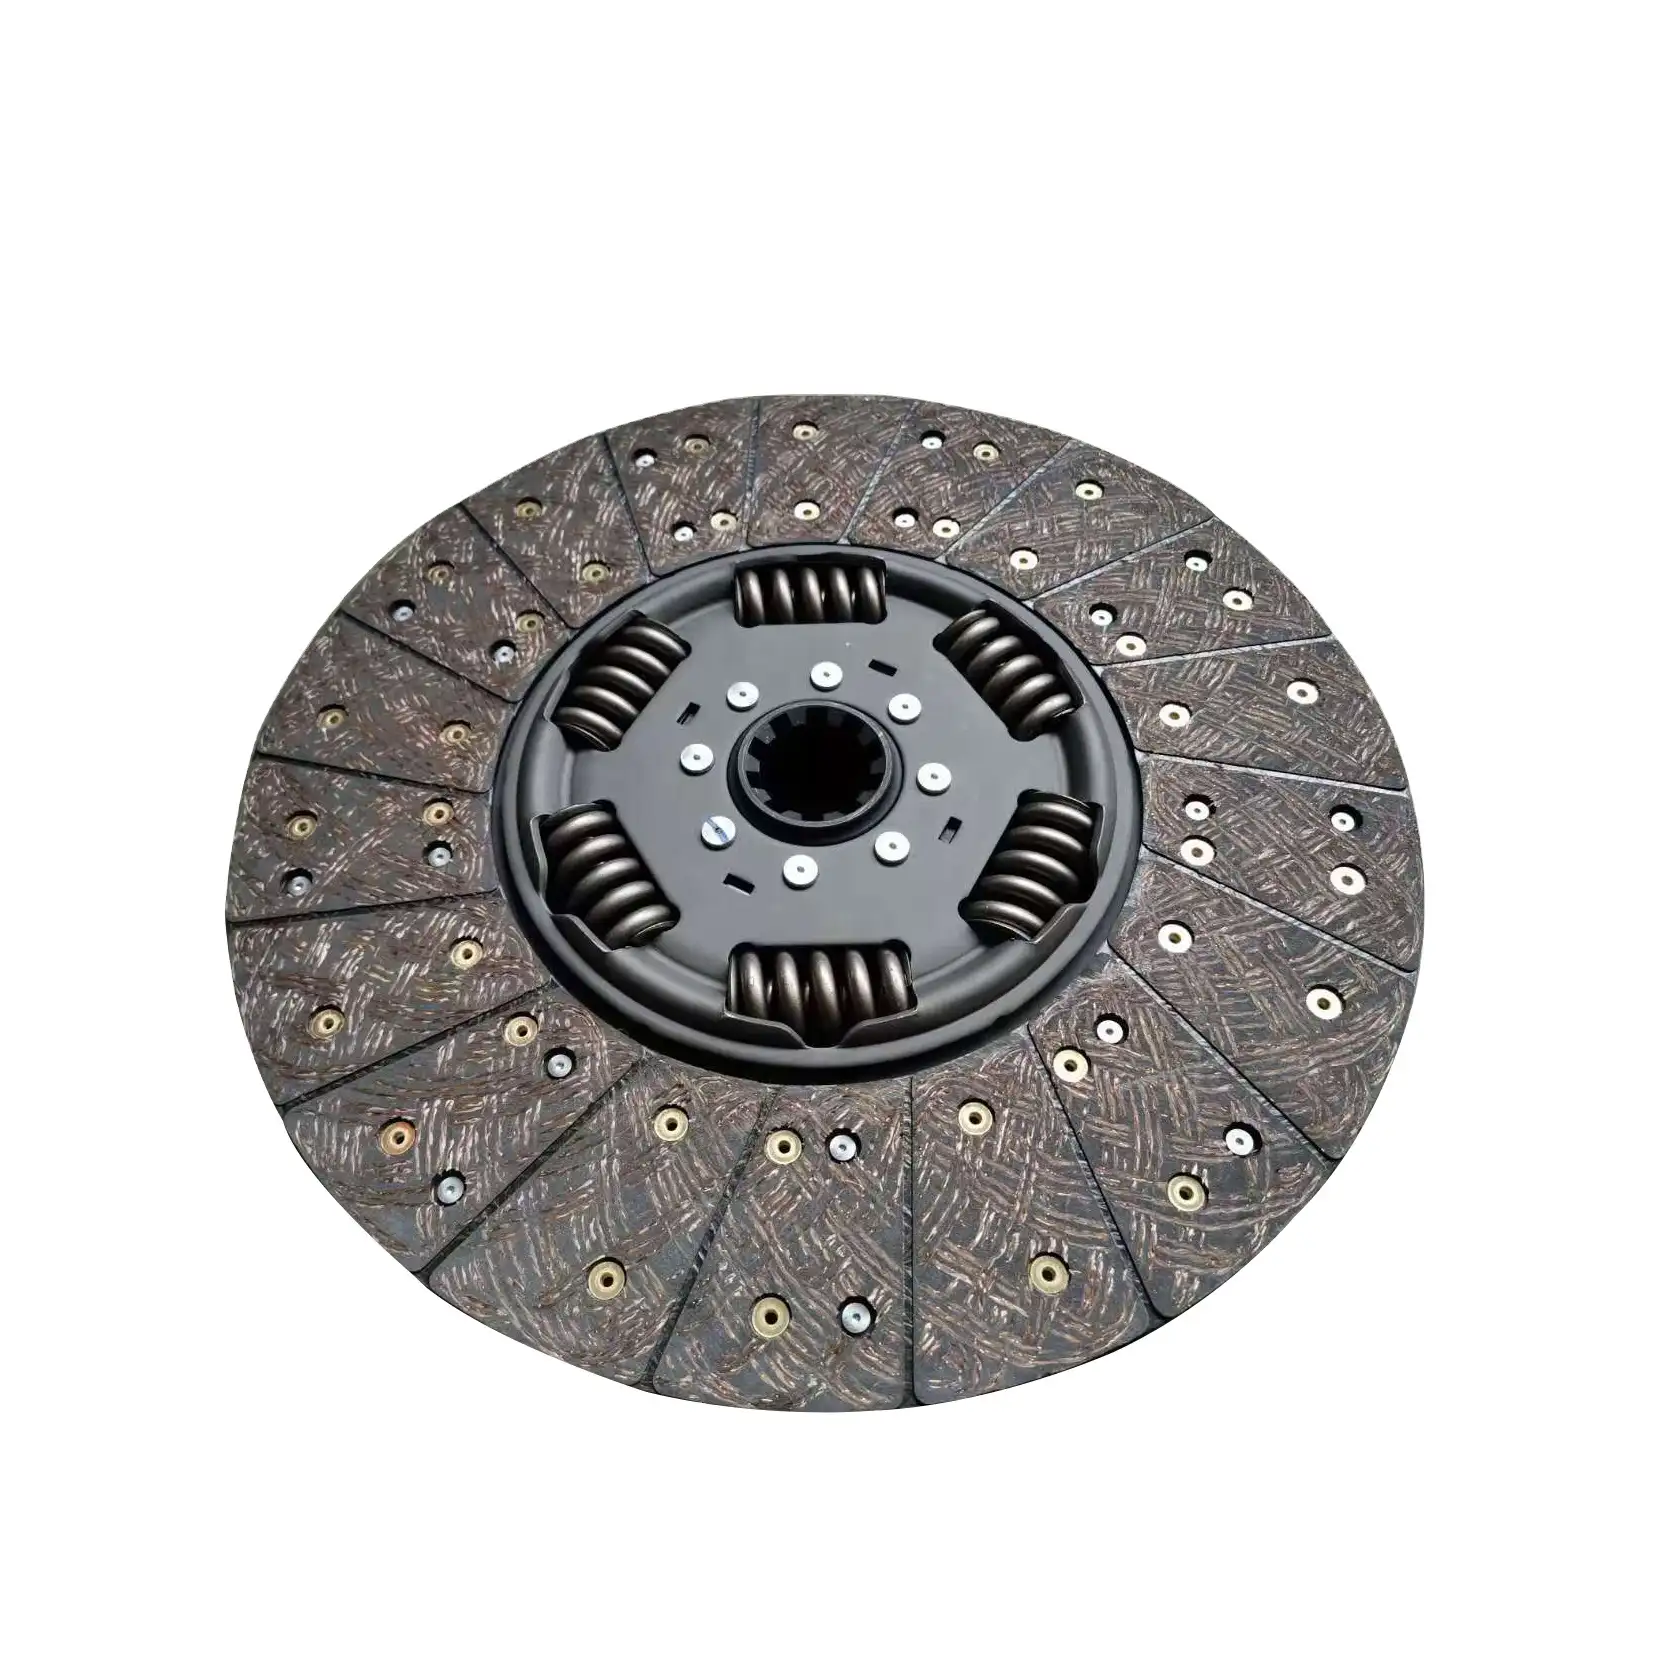 Factory direct sell centrifugal clutch plate compactor 1878 634 027 430mm Heavy Duty Truck Clutch Disc for valeo clutch kit